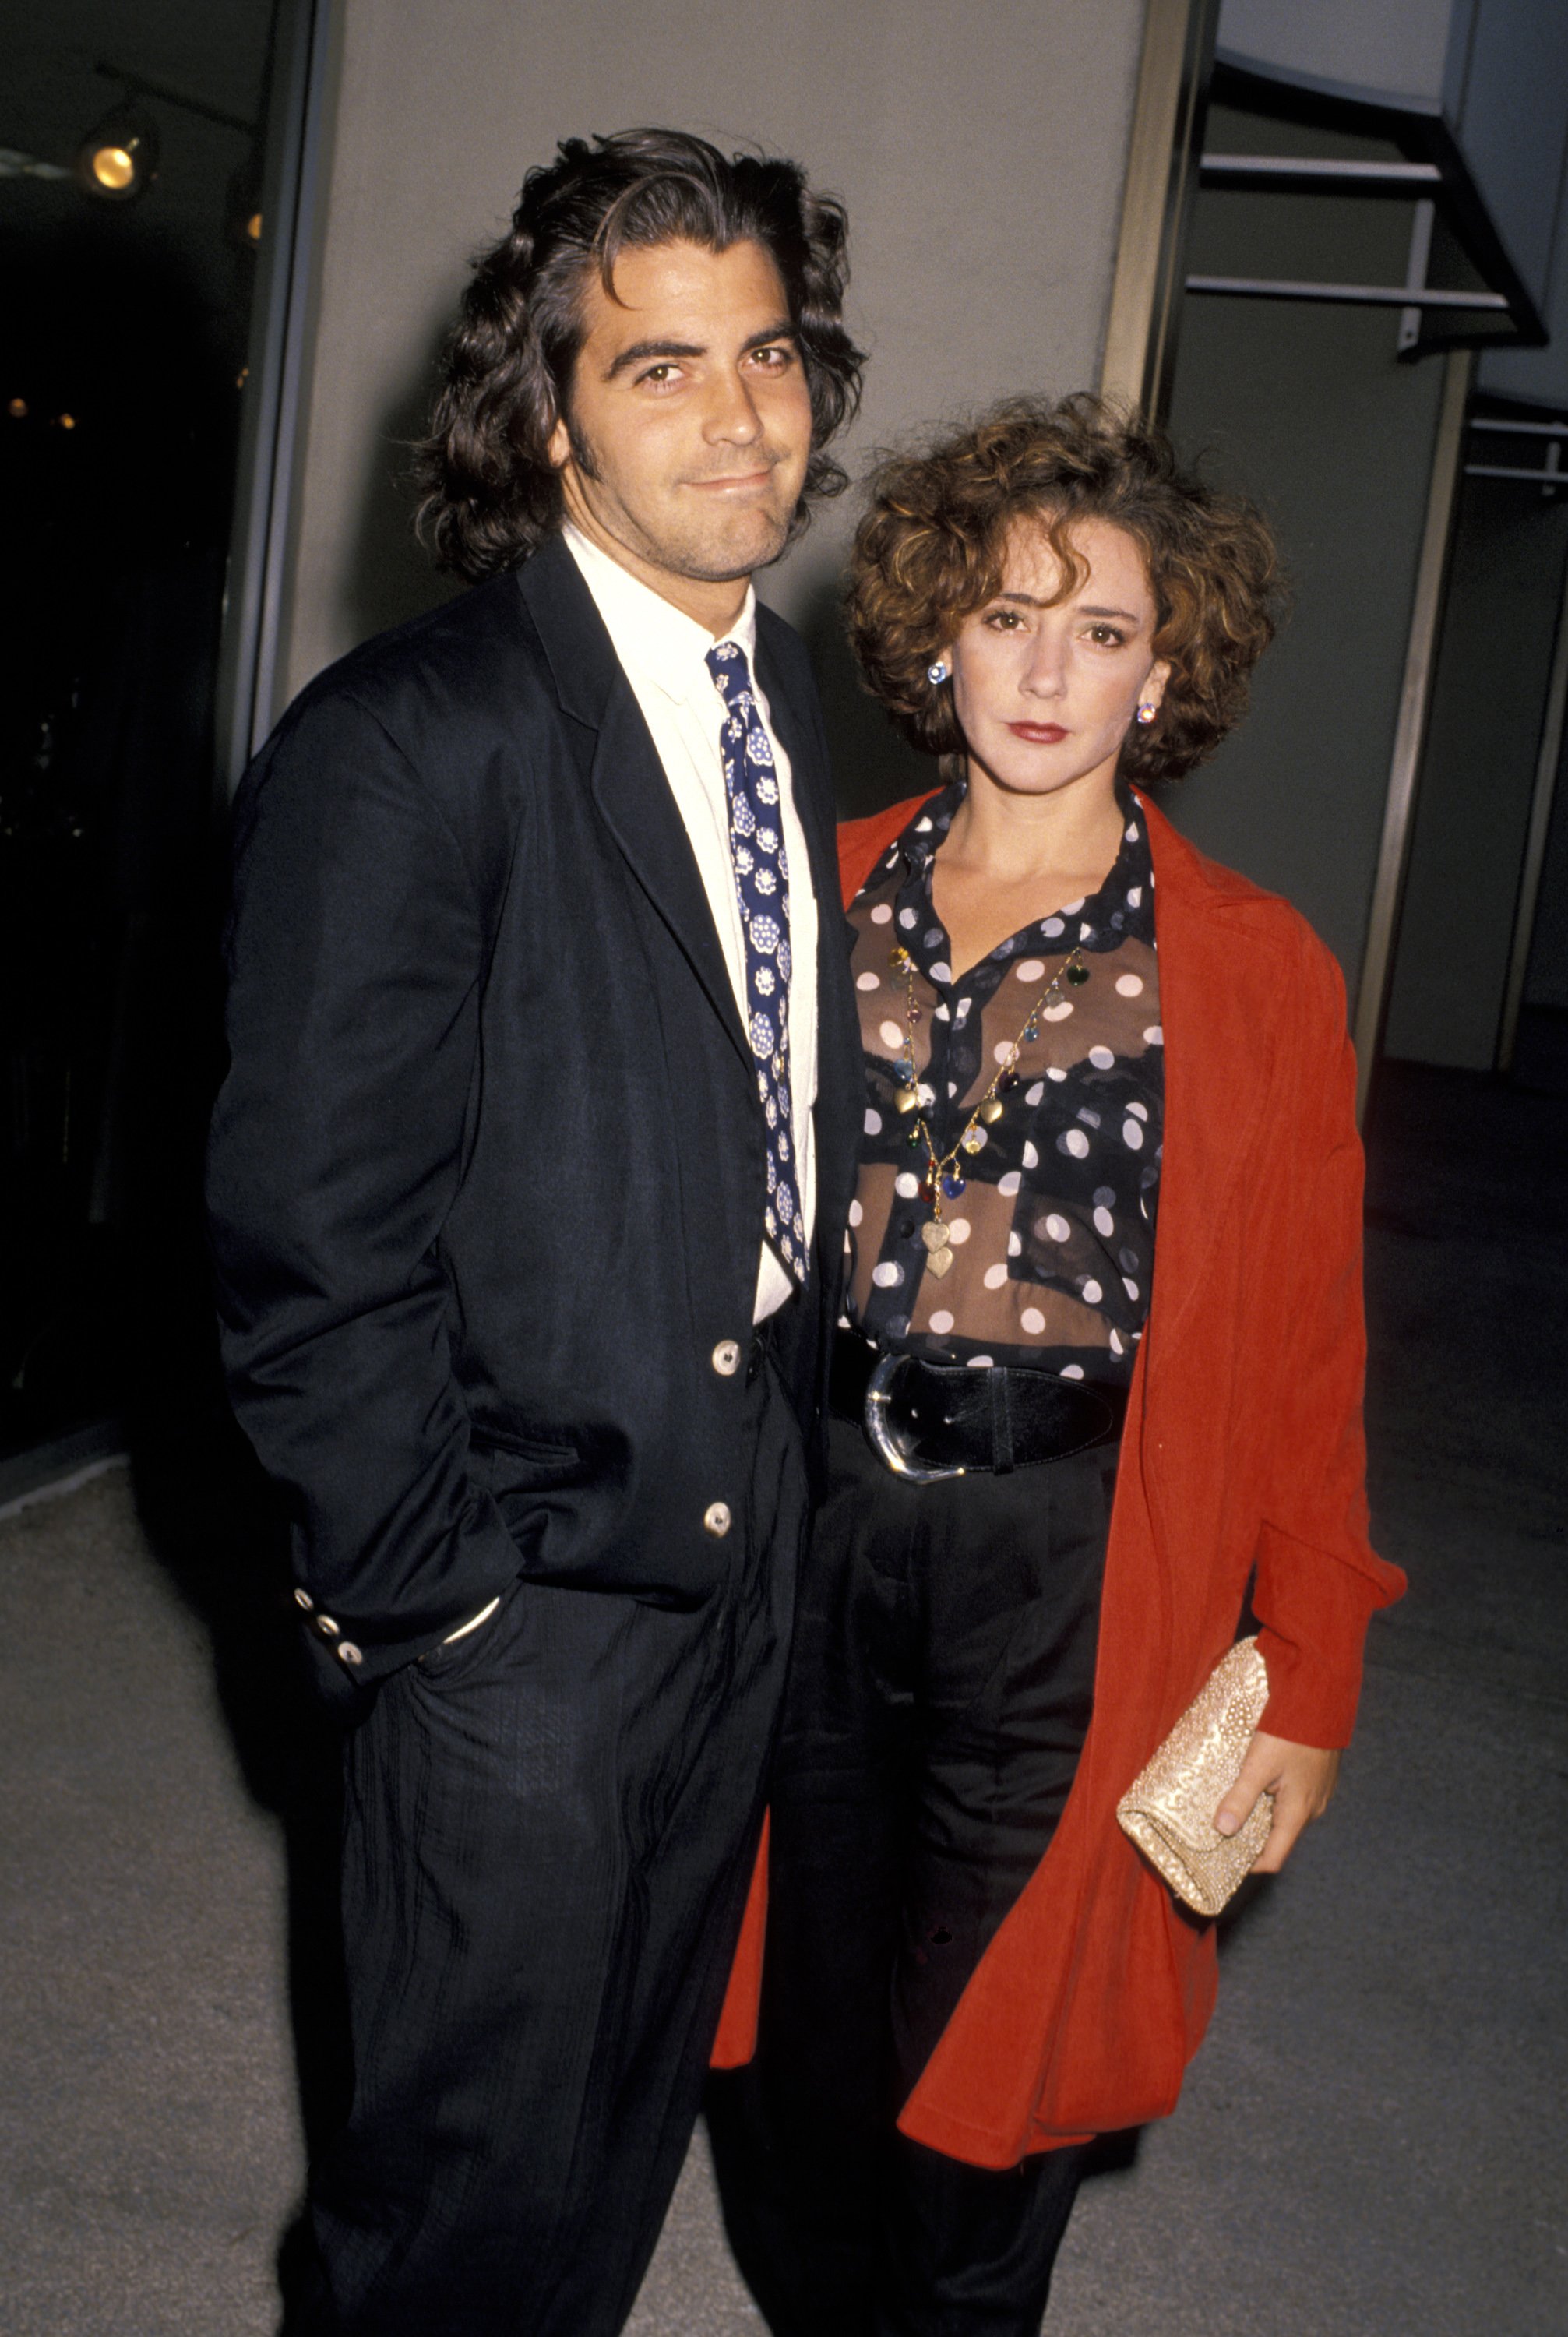 George Clooney and wife Talia Balsam attend the ABC Television Affiliates Party on June 14, 1990 at the Century Plaza Hotel in Los Angeles, California | Source: Getty Images 